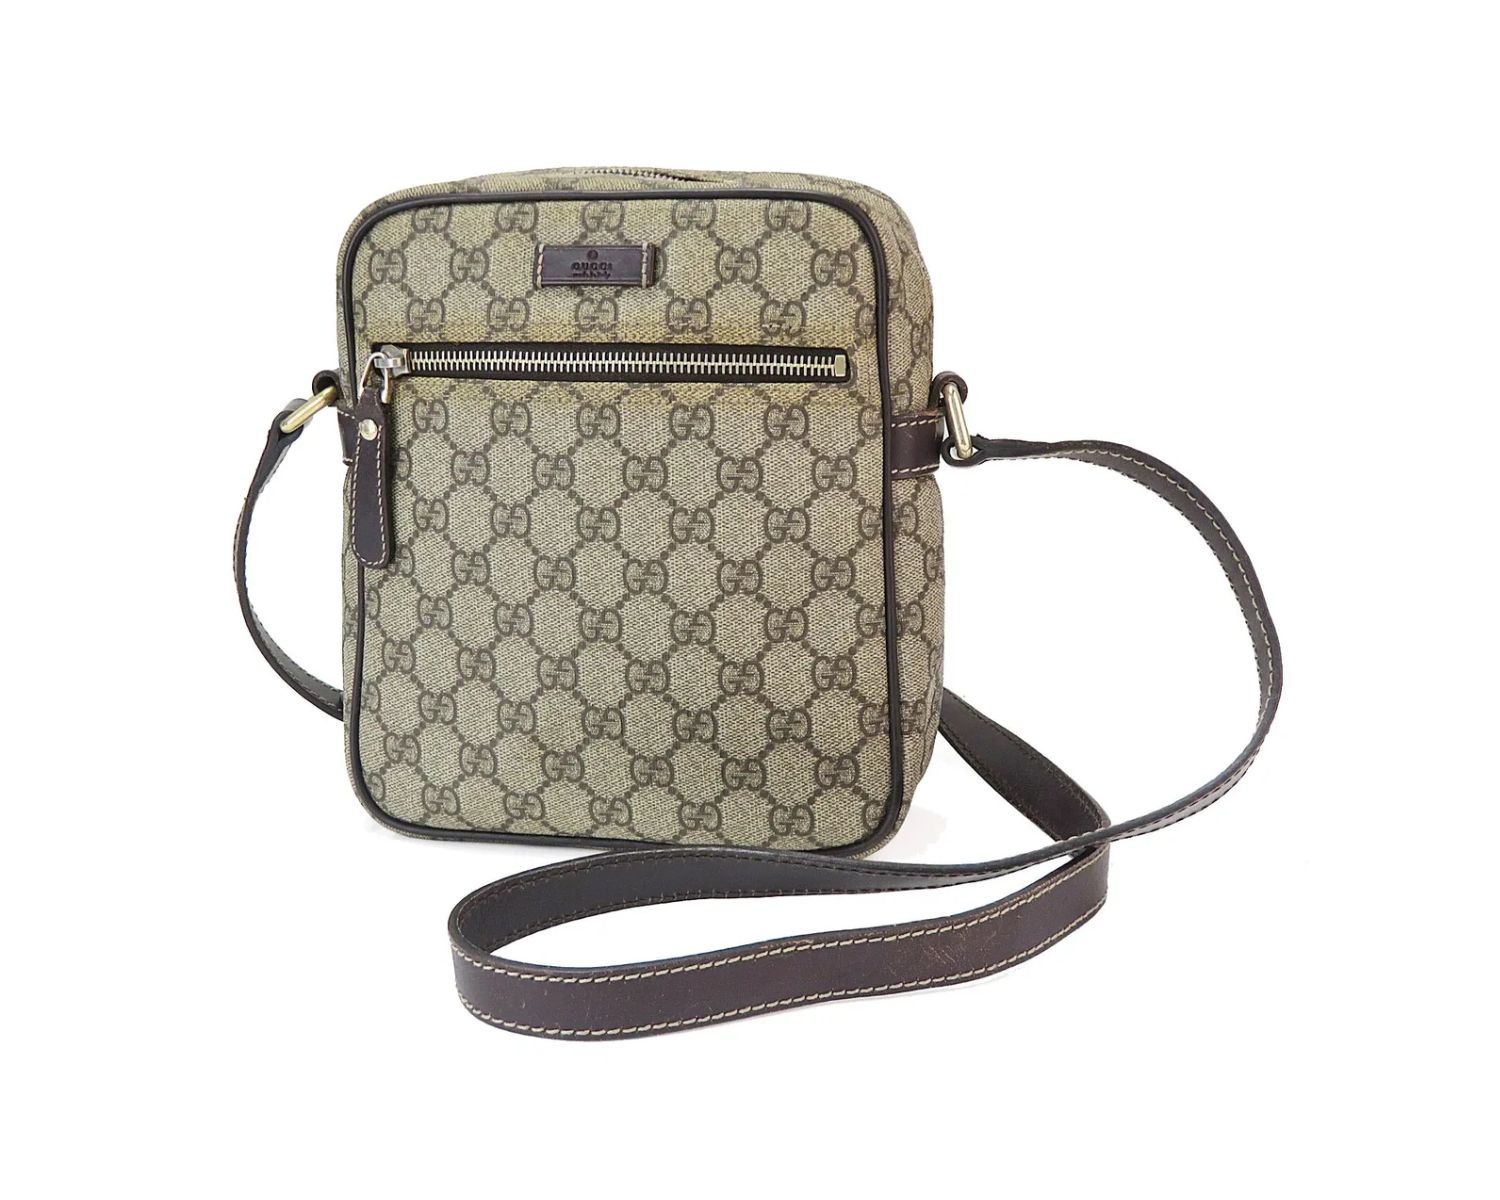 8-extraordinary-facts-about-gucci-crossbody-bag